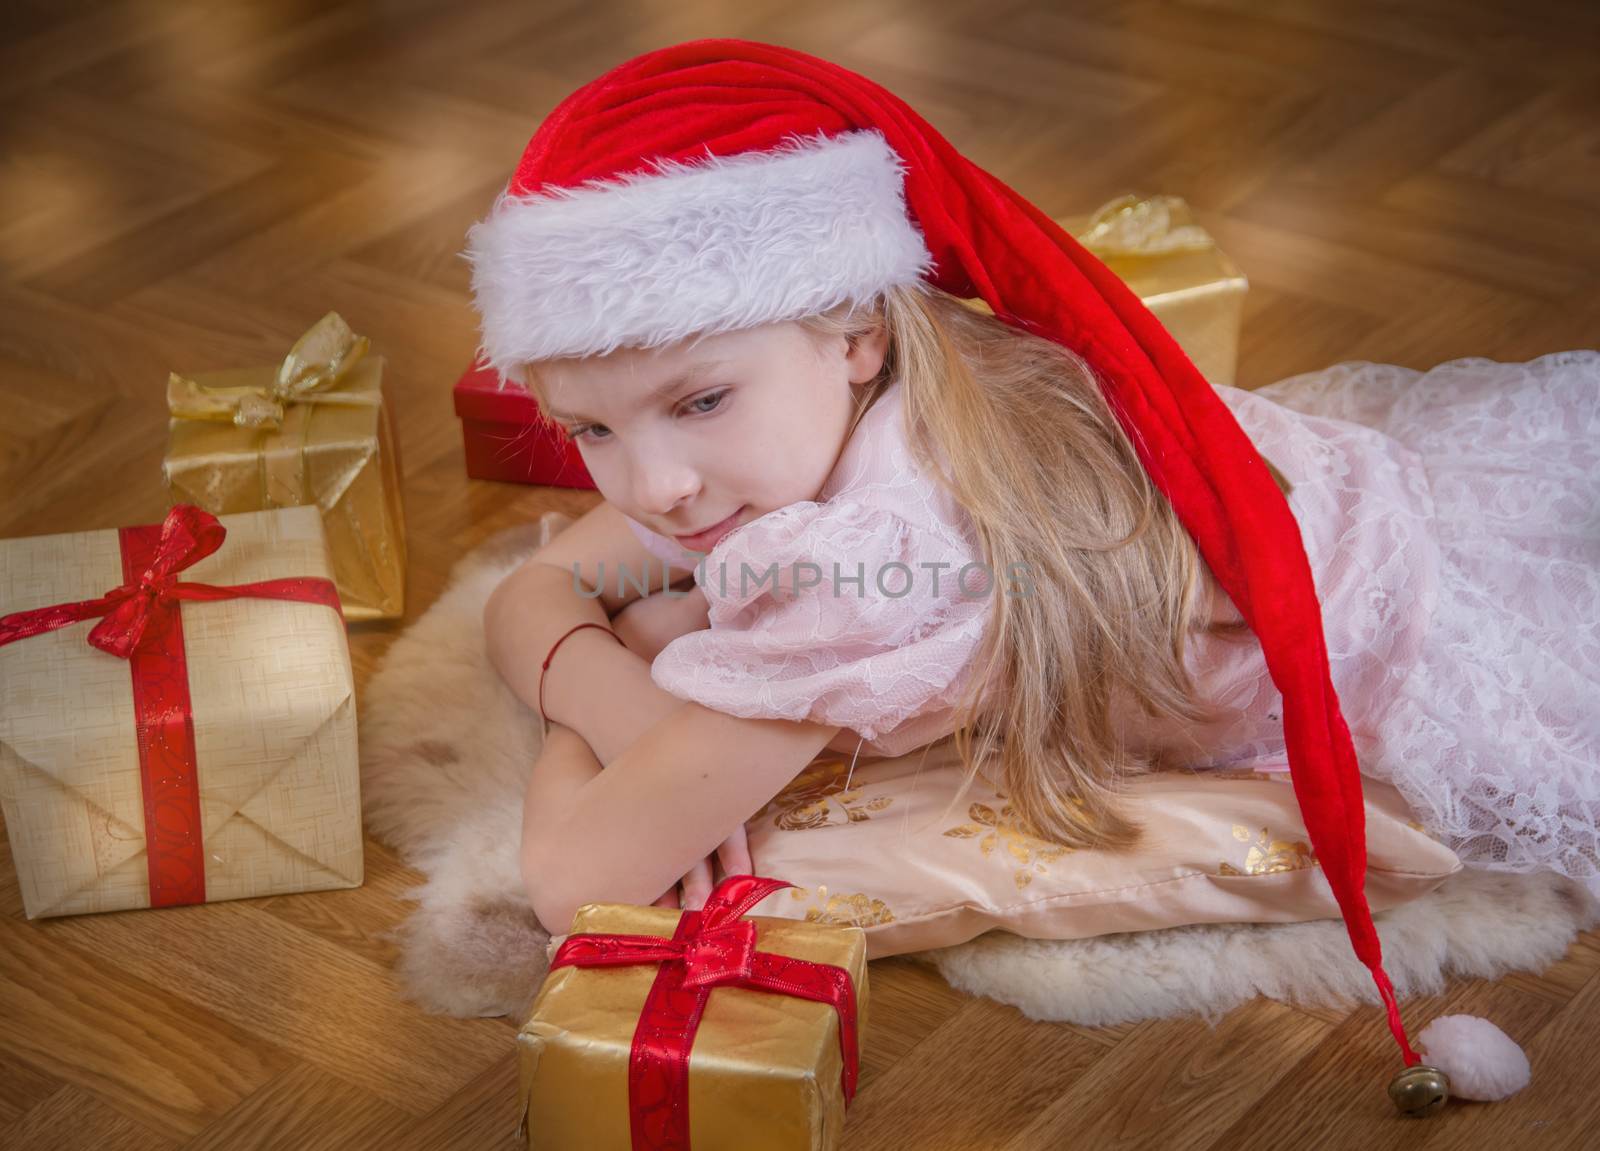 Cutre girl in Santa hat lying among Christmas gifts